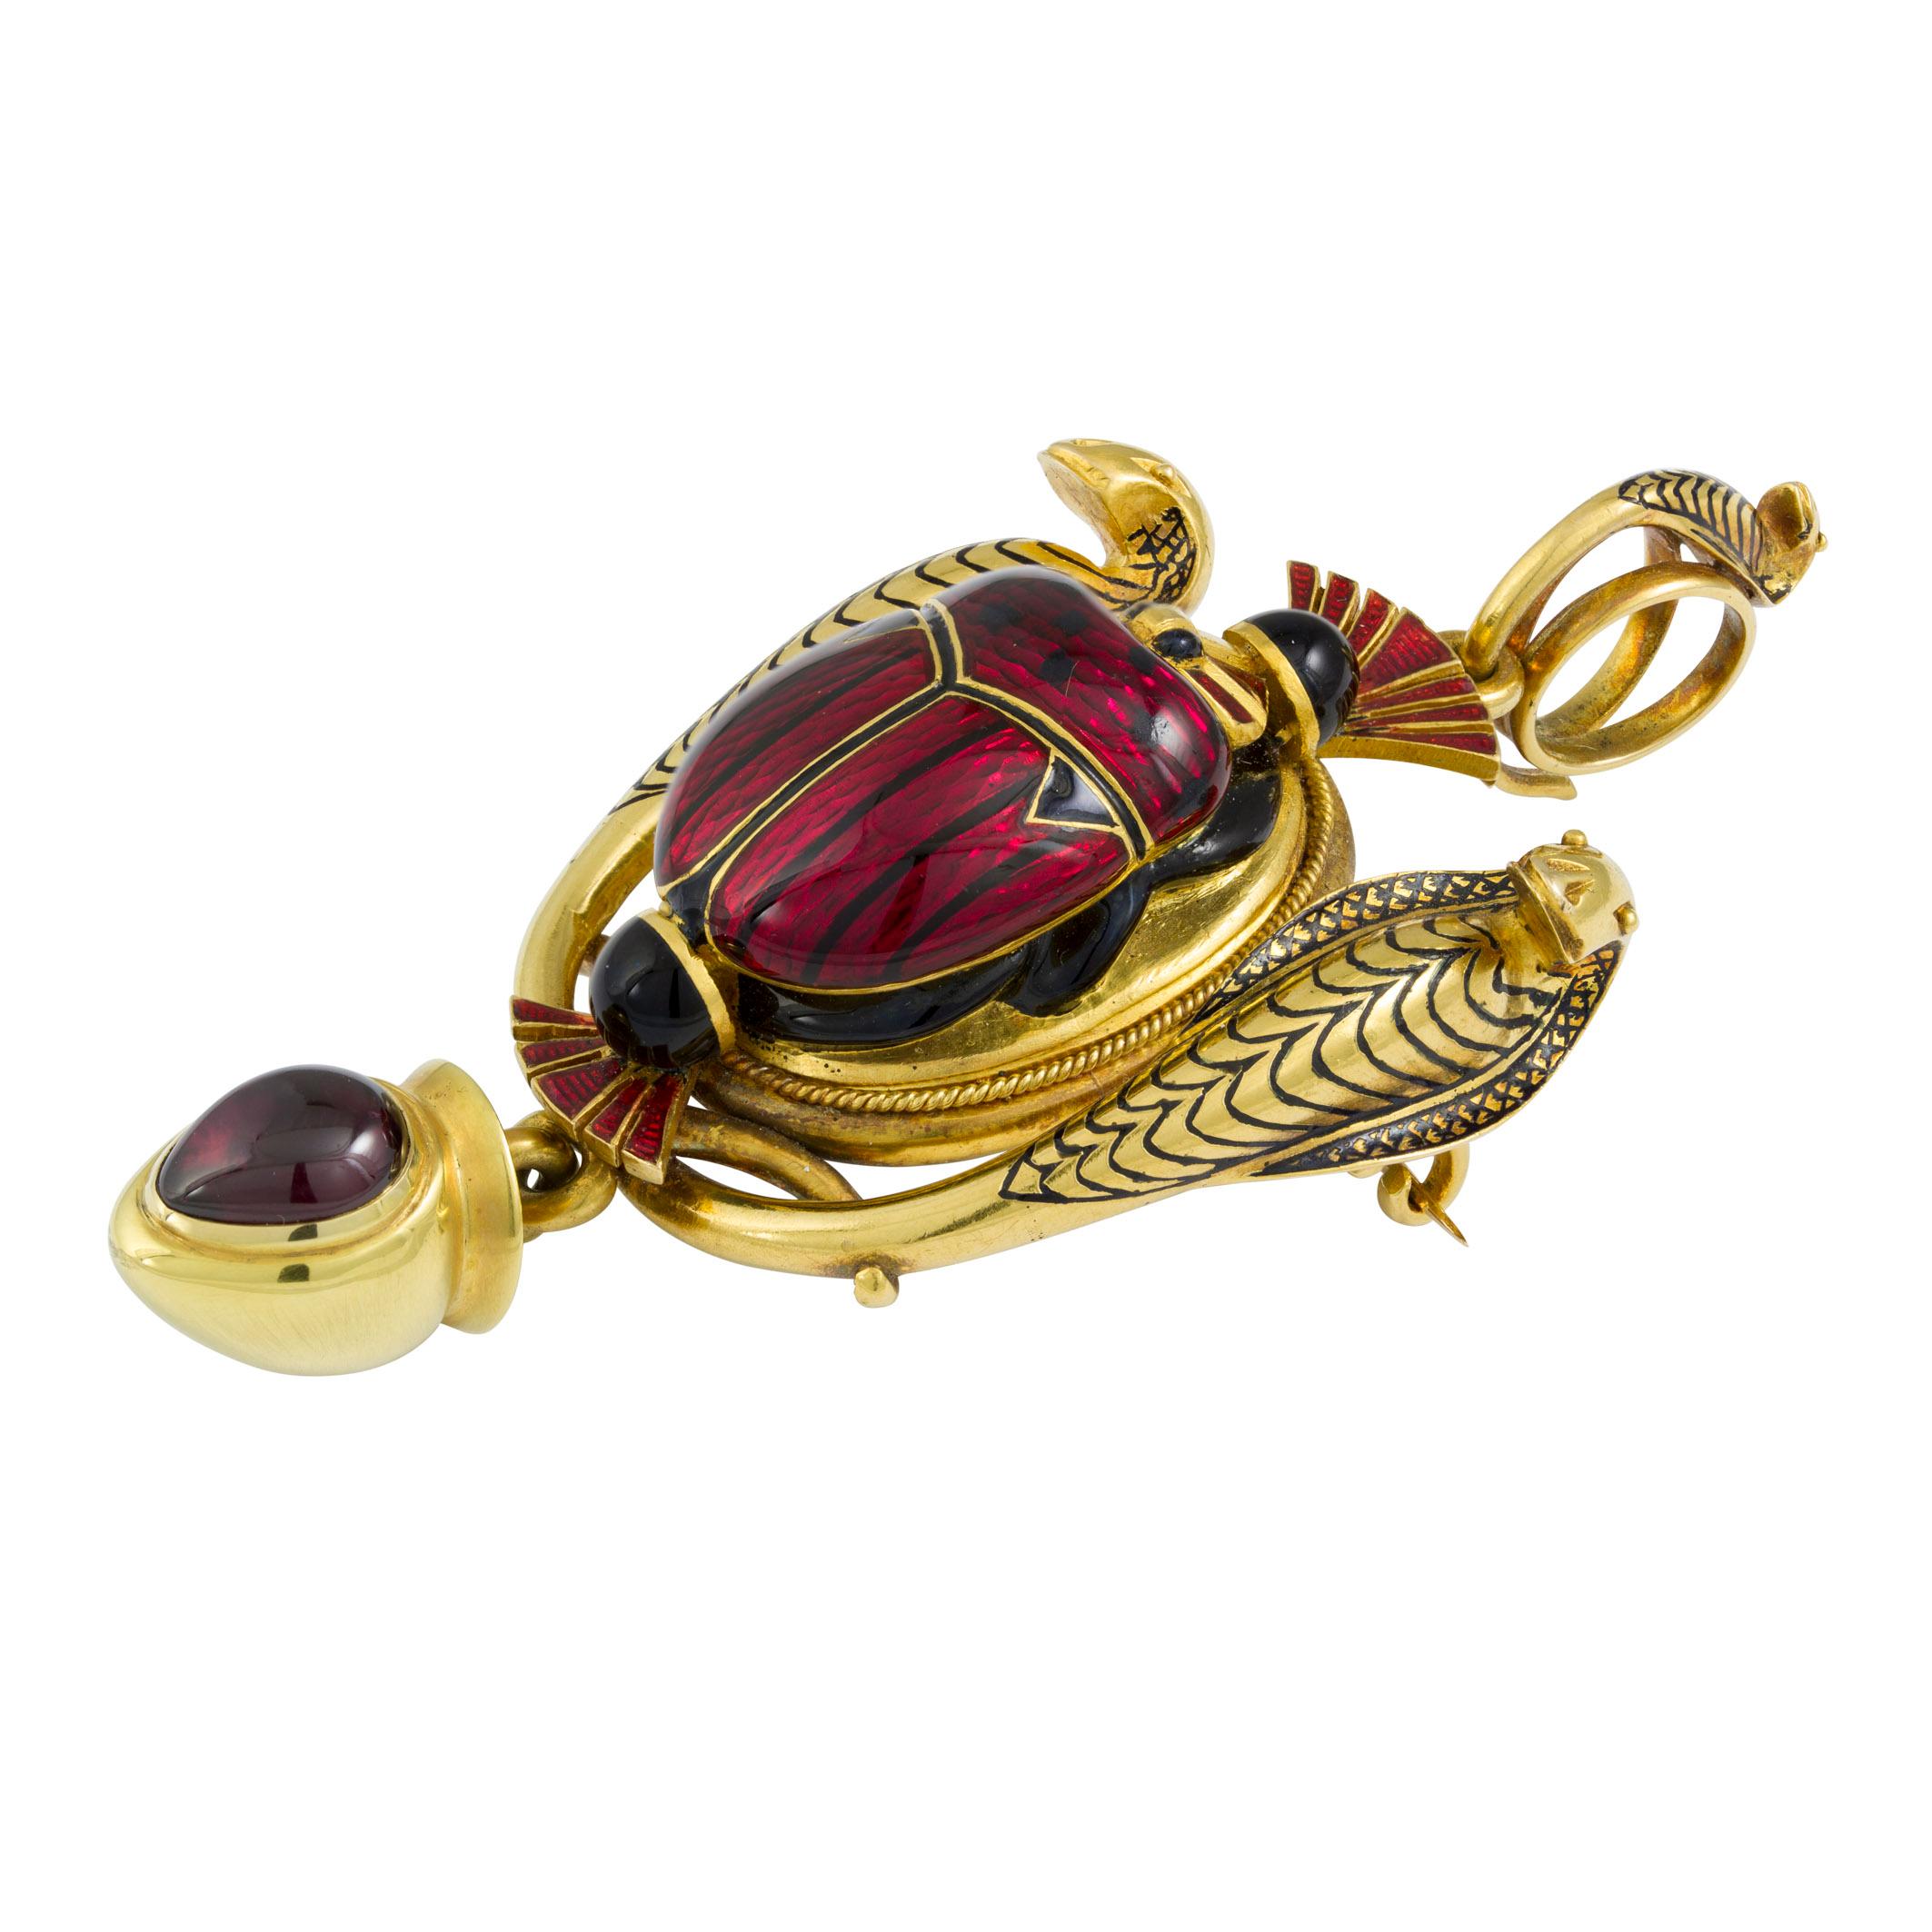 The Thebes Scarab Pendant: an archaeological revival gold and enamel scarab brooch/pendant, by Robert Phillips, set to the centre with a raised scarab rendered in deep red guilloché enamel with black enamel detail, between a pair of finely modelled